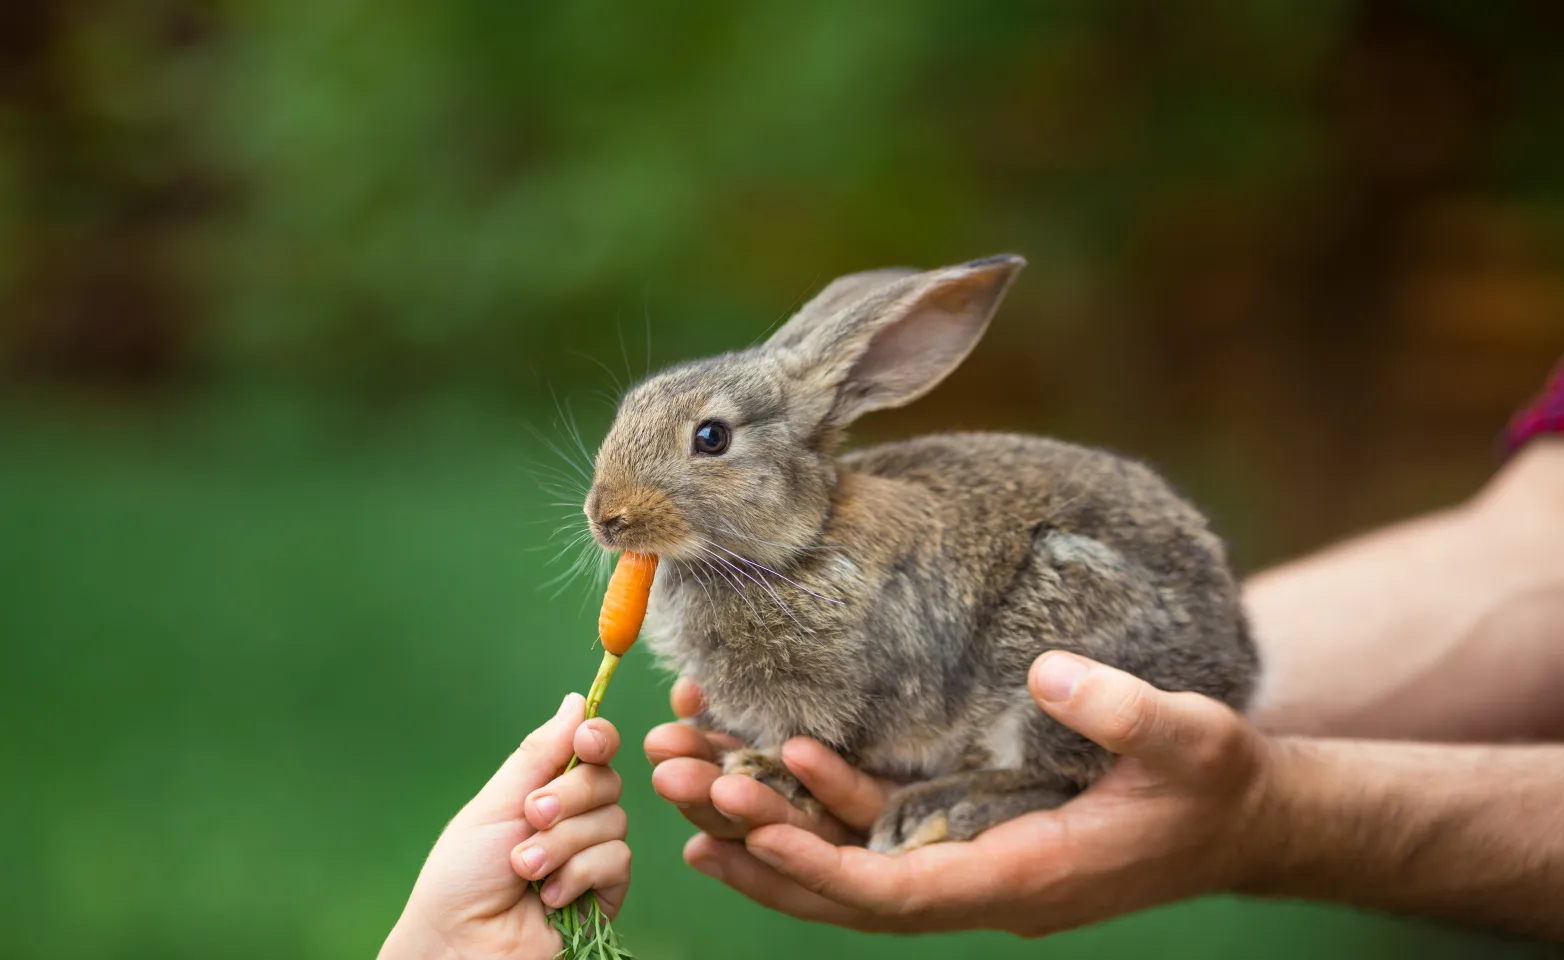 Cute Bunny Rabbit being held and the other person is feeding it a carrot